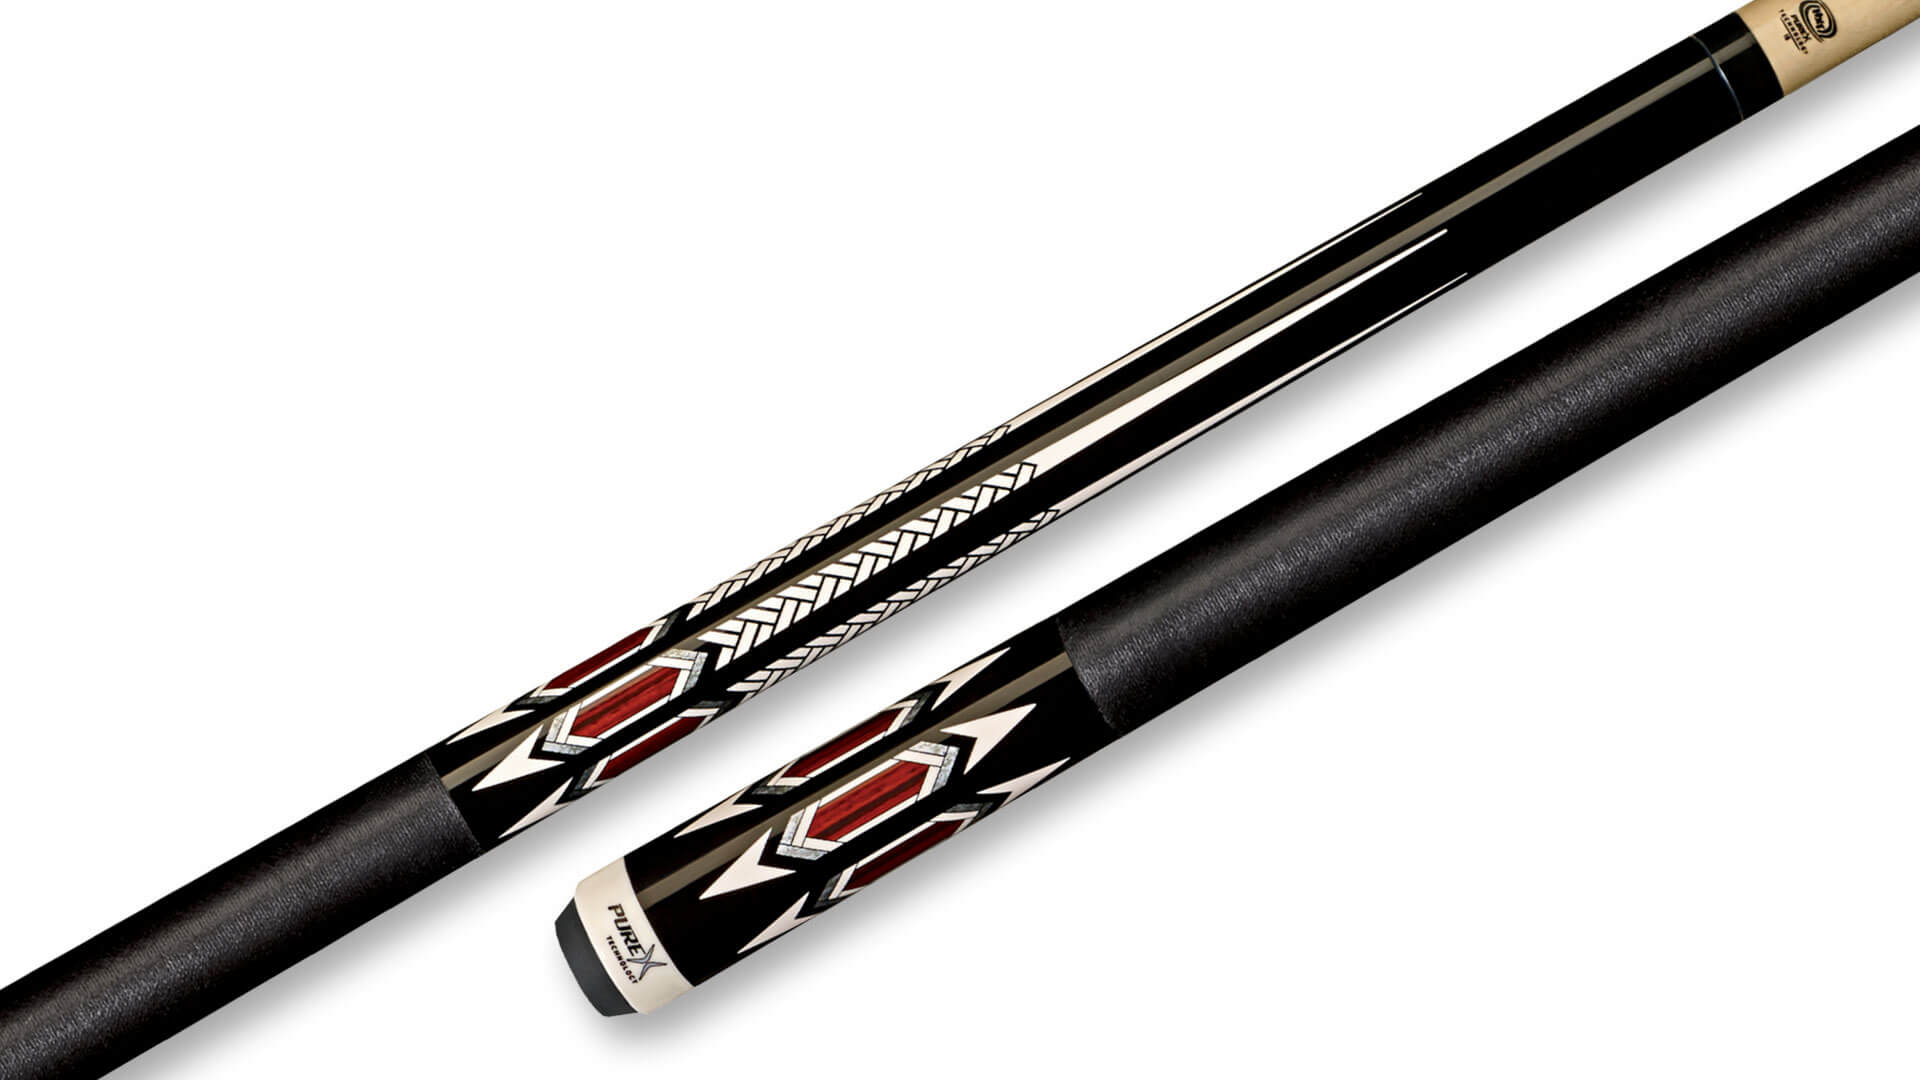 PureX HXT95  POOL CUE WITH KAMUI TIP BRAND NEW FREE SHIPPING FREE HARD CASE 